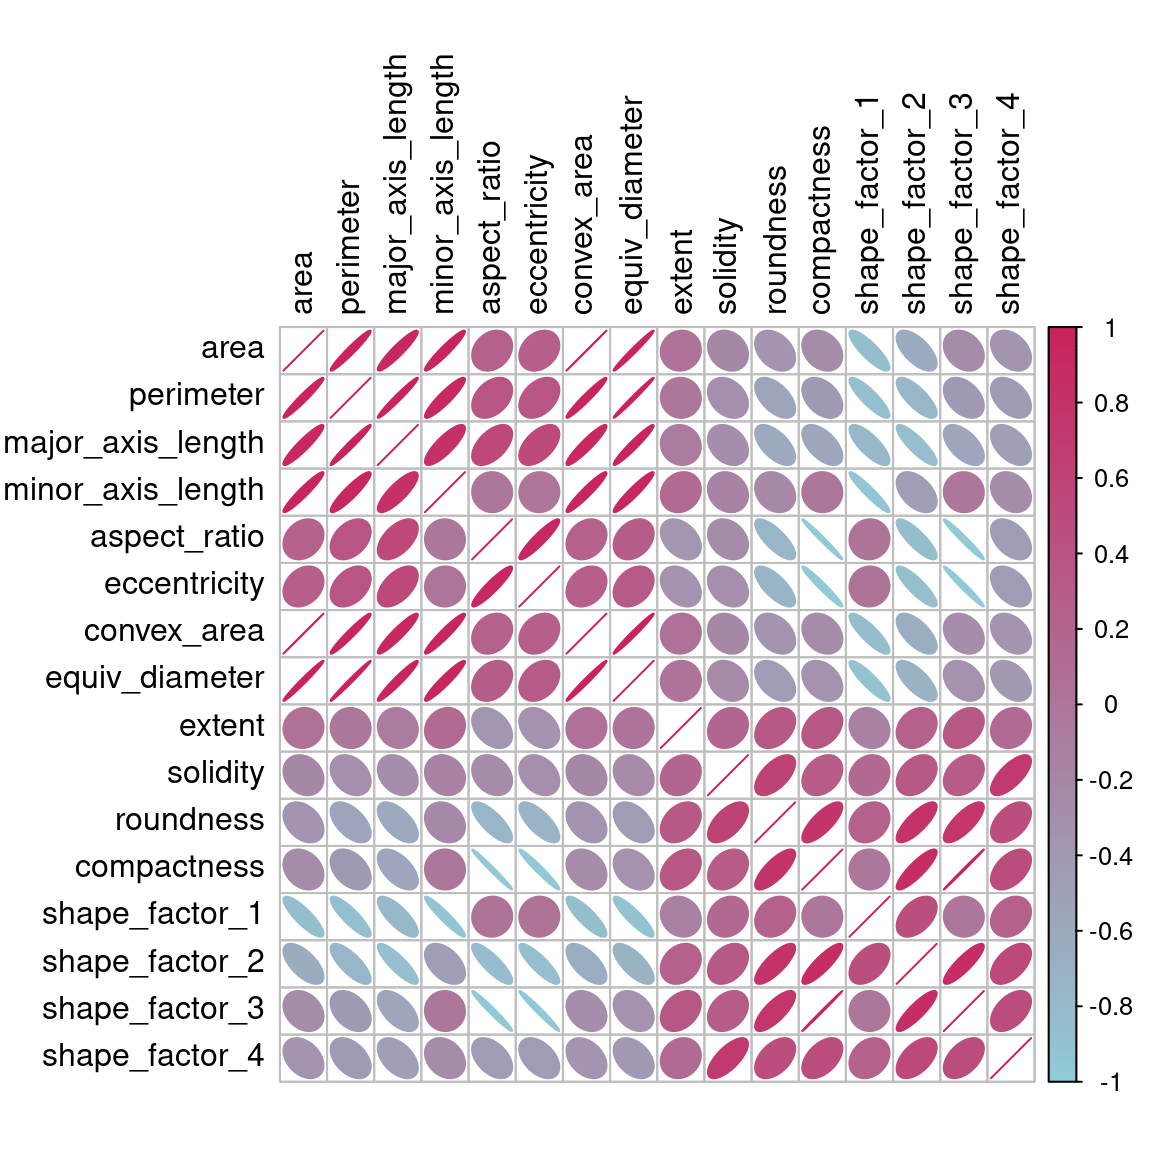 A correlation matrix of the predictors with variables ordered via clustering. There are two to three clusters that have high within cluster correlations.